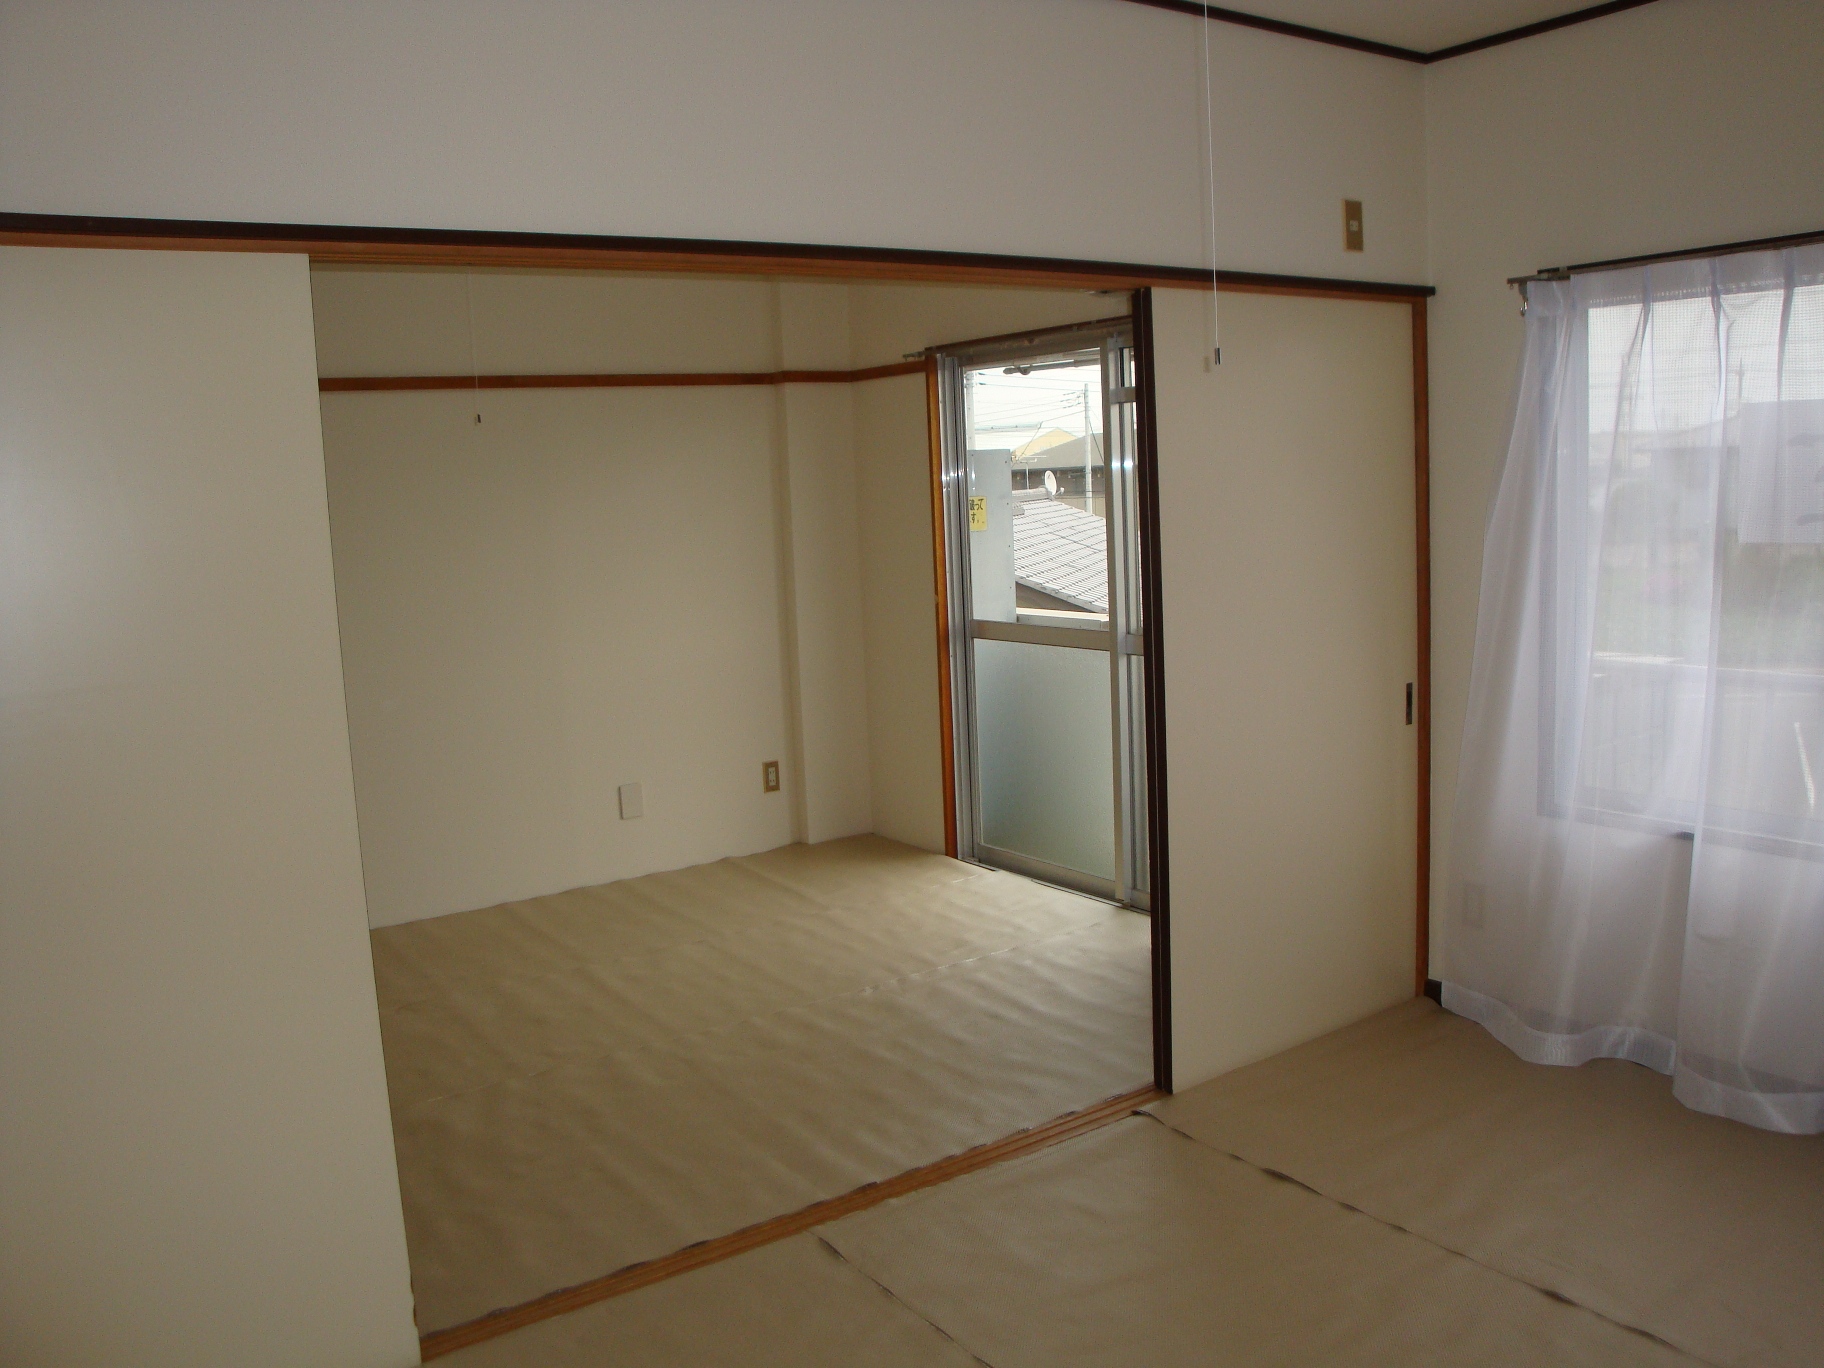 Living and room. When you open and close the door will be wide with depth